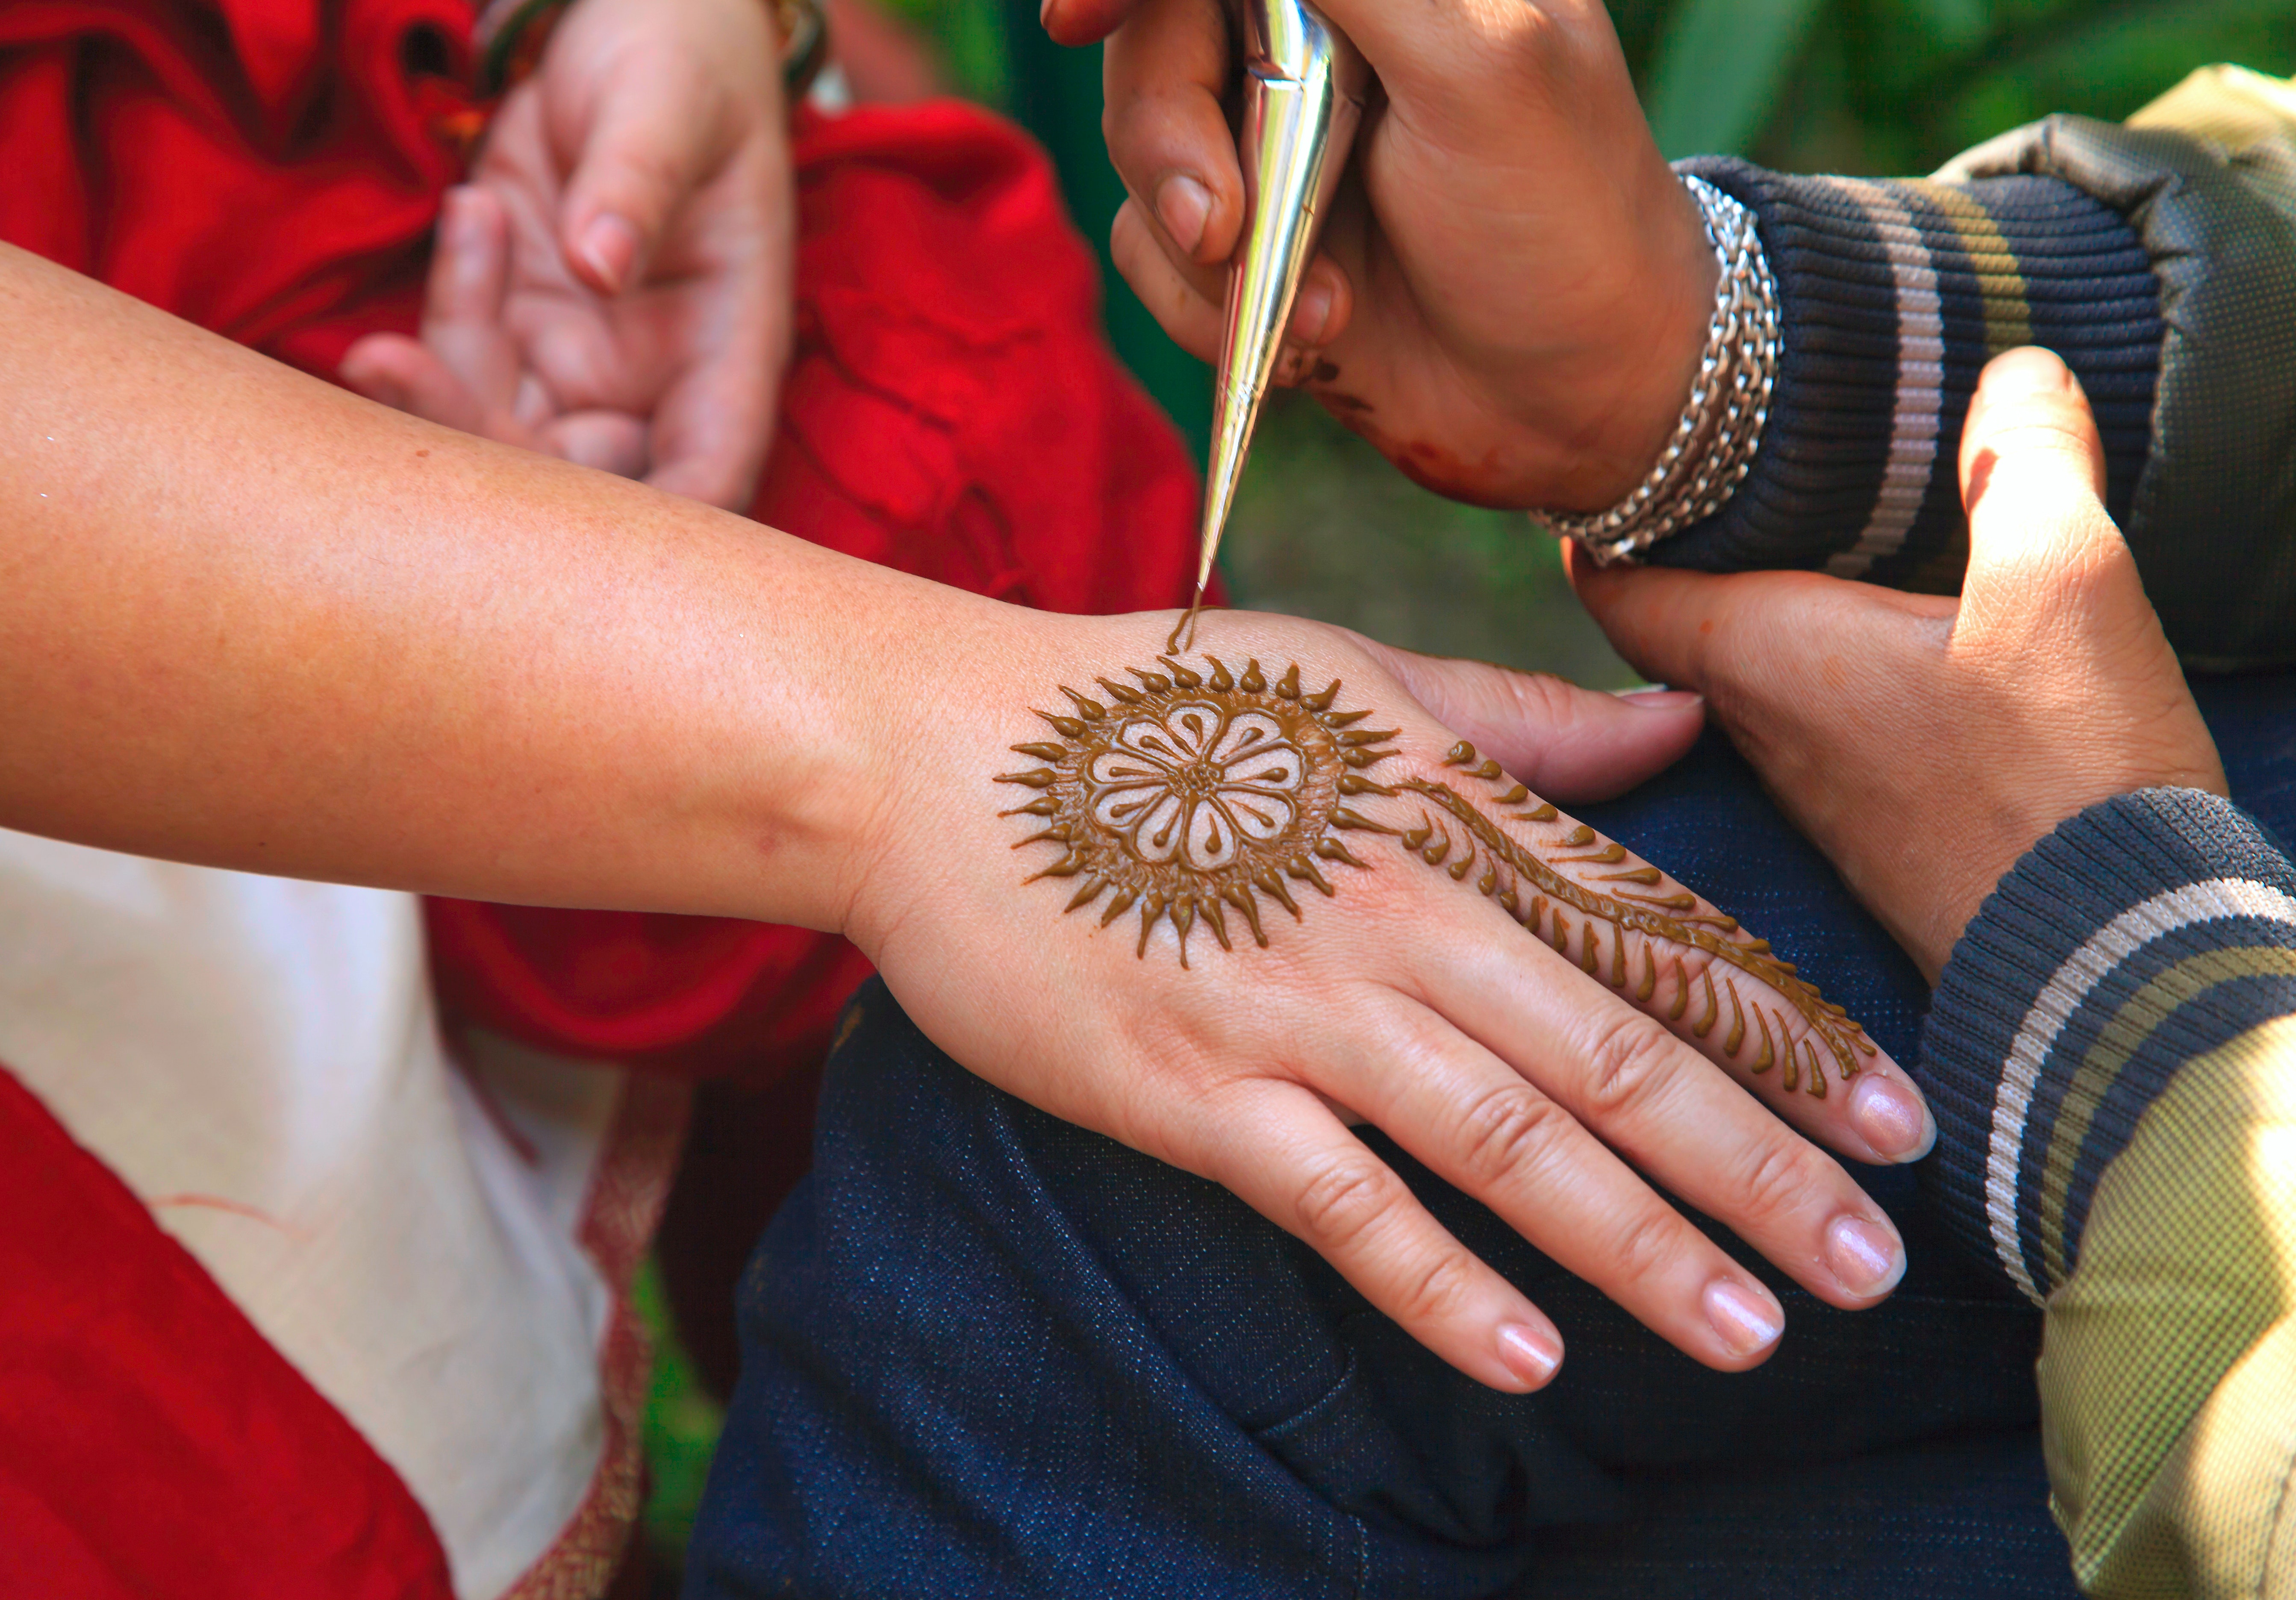 Artist drawing mehendi designs in henna on another's hands